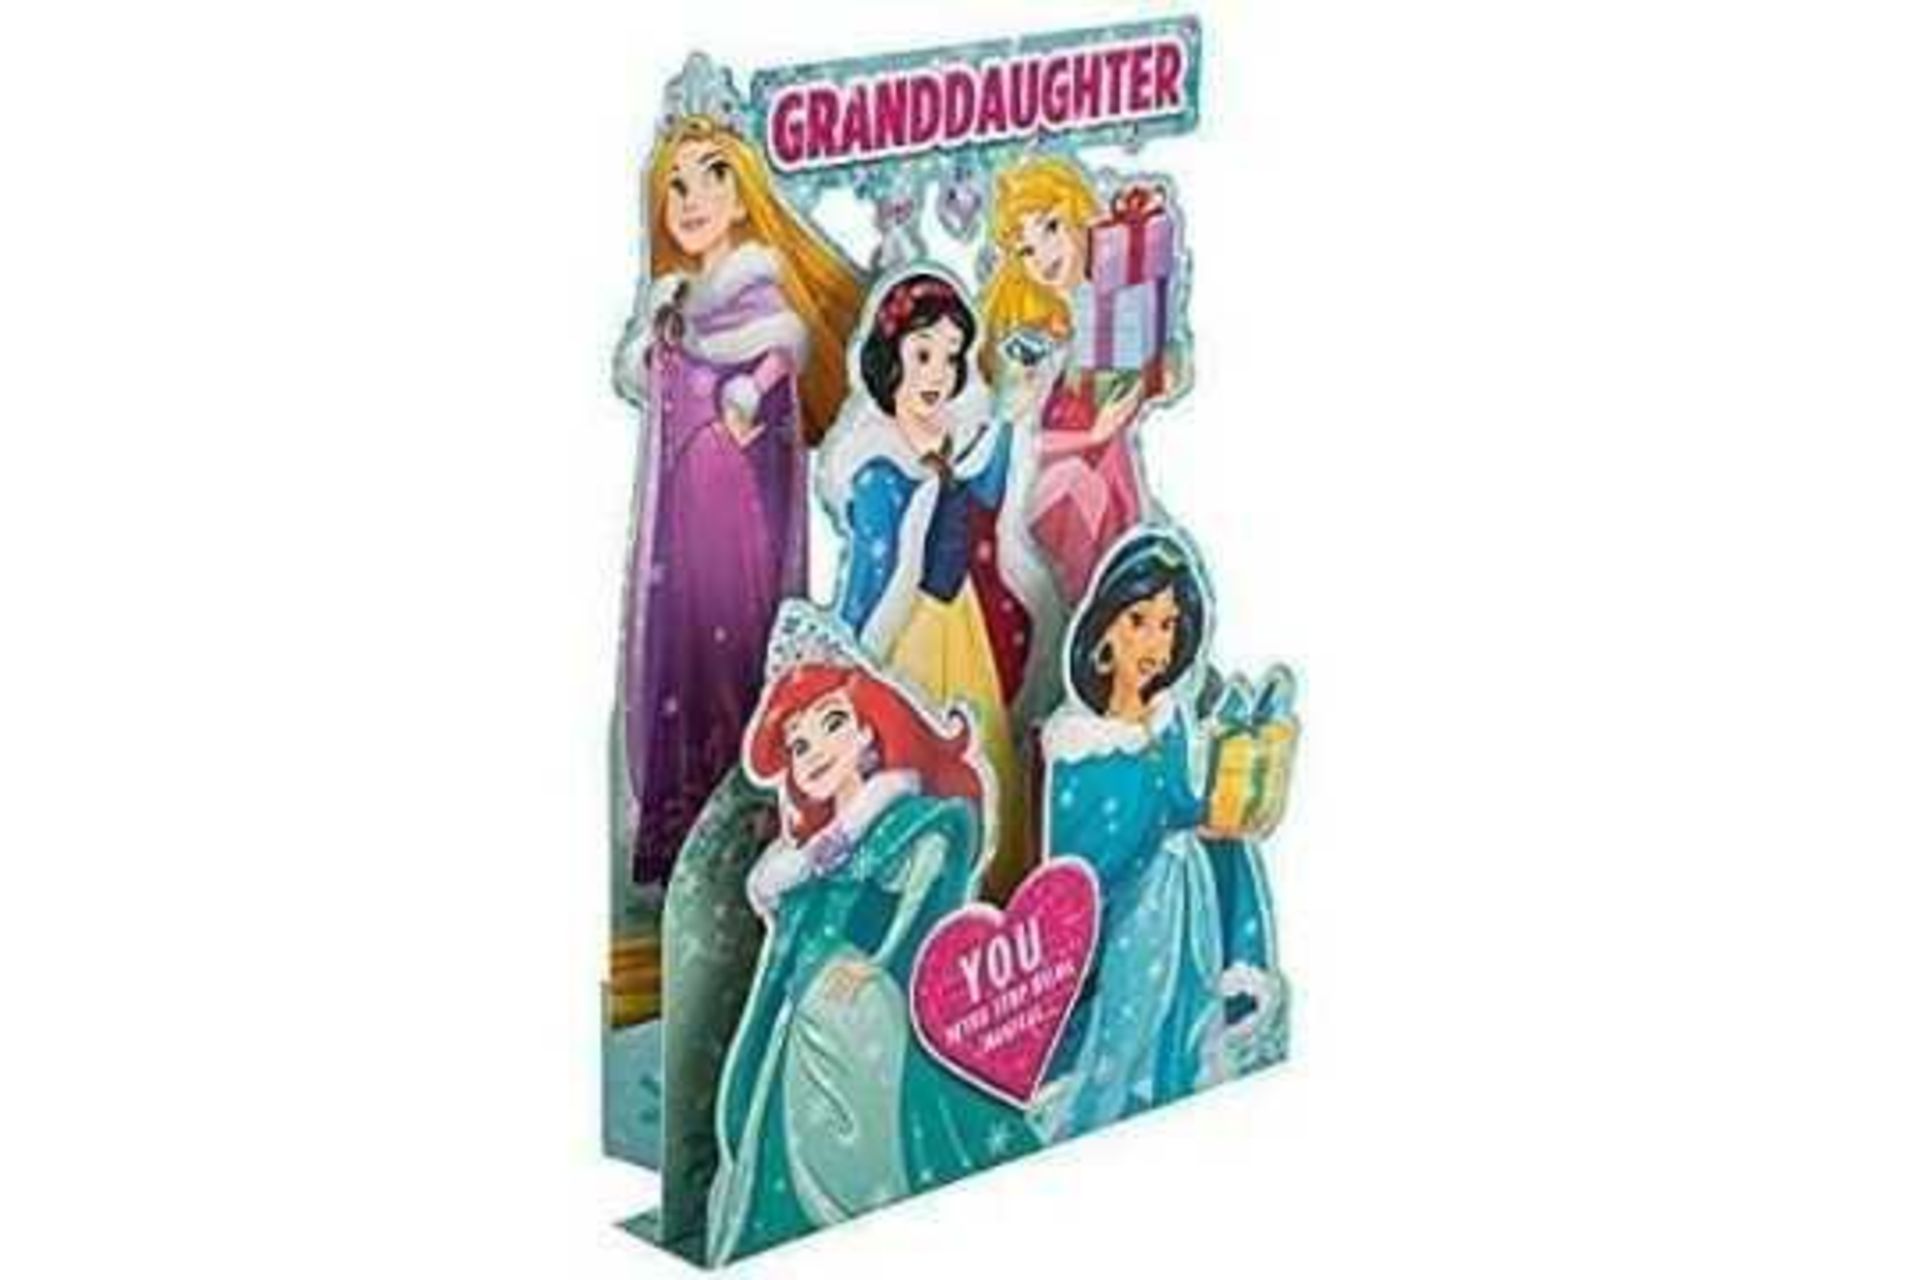 RRP £1340 BRAND NEW AND SEALED (556 Items) 200 x Christmas Card for Granddaughter from Hallmark - Po